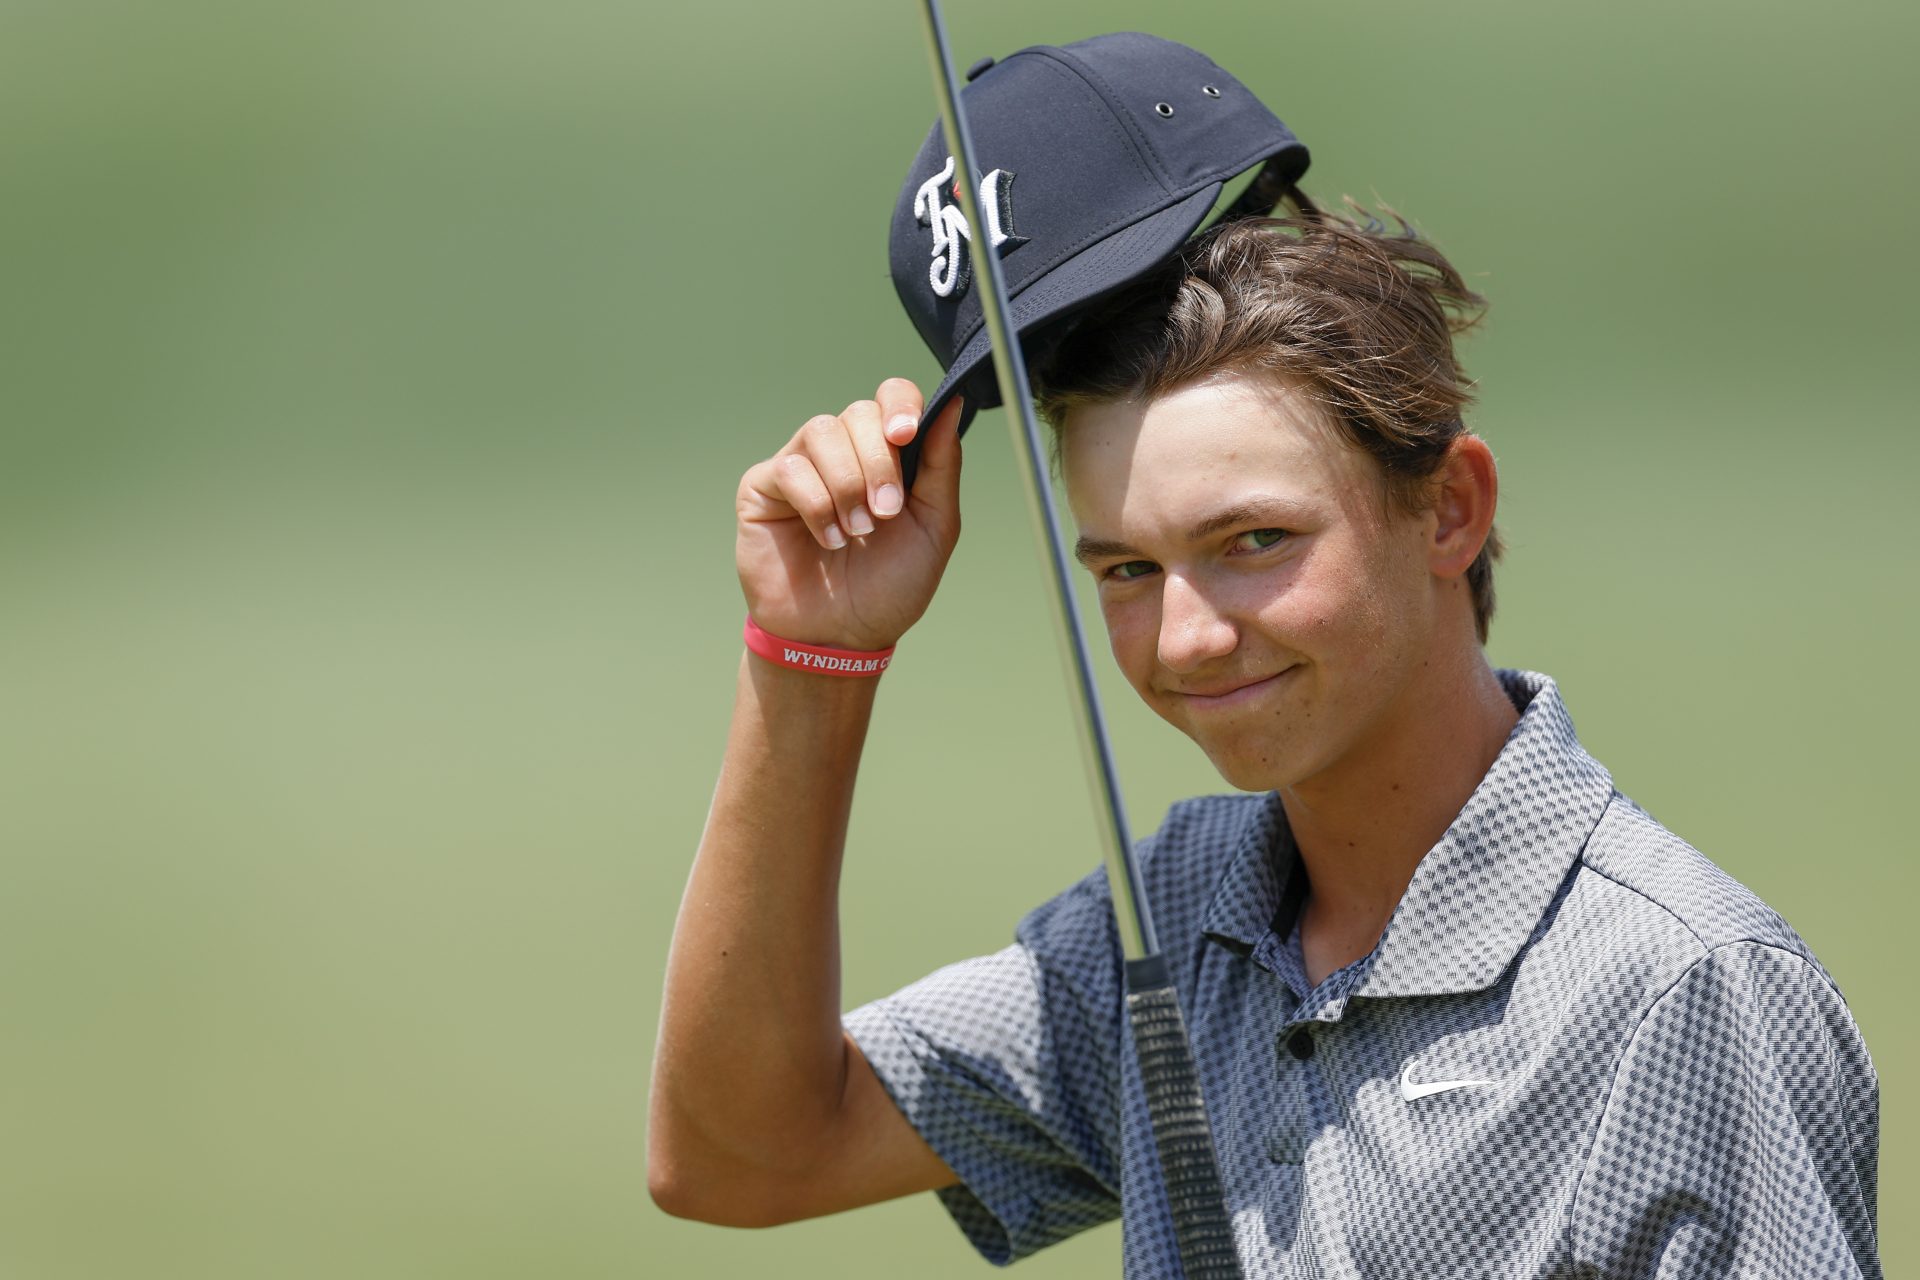 Miles Russell: The 15 year old golf prodigy following the steps of Tiger Woods